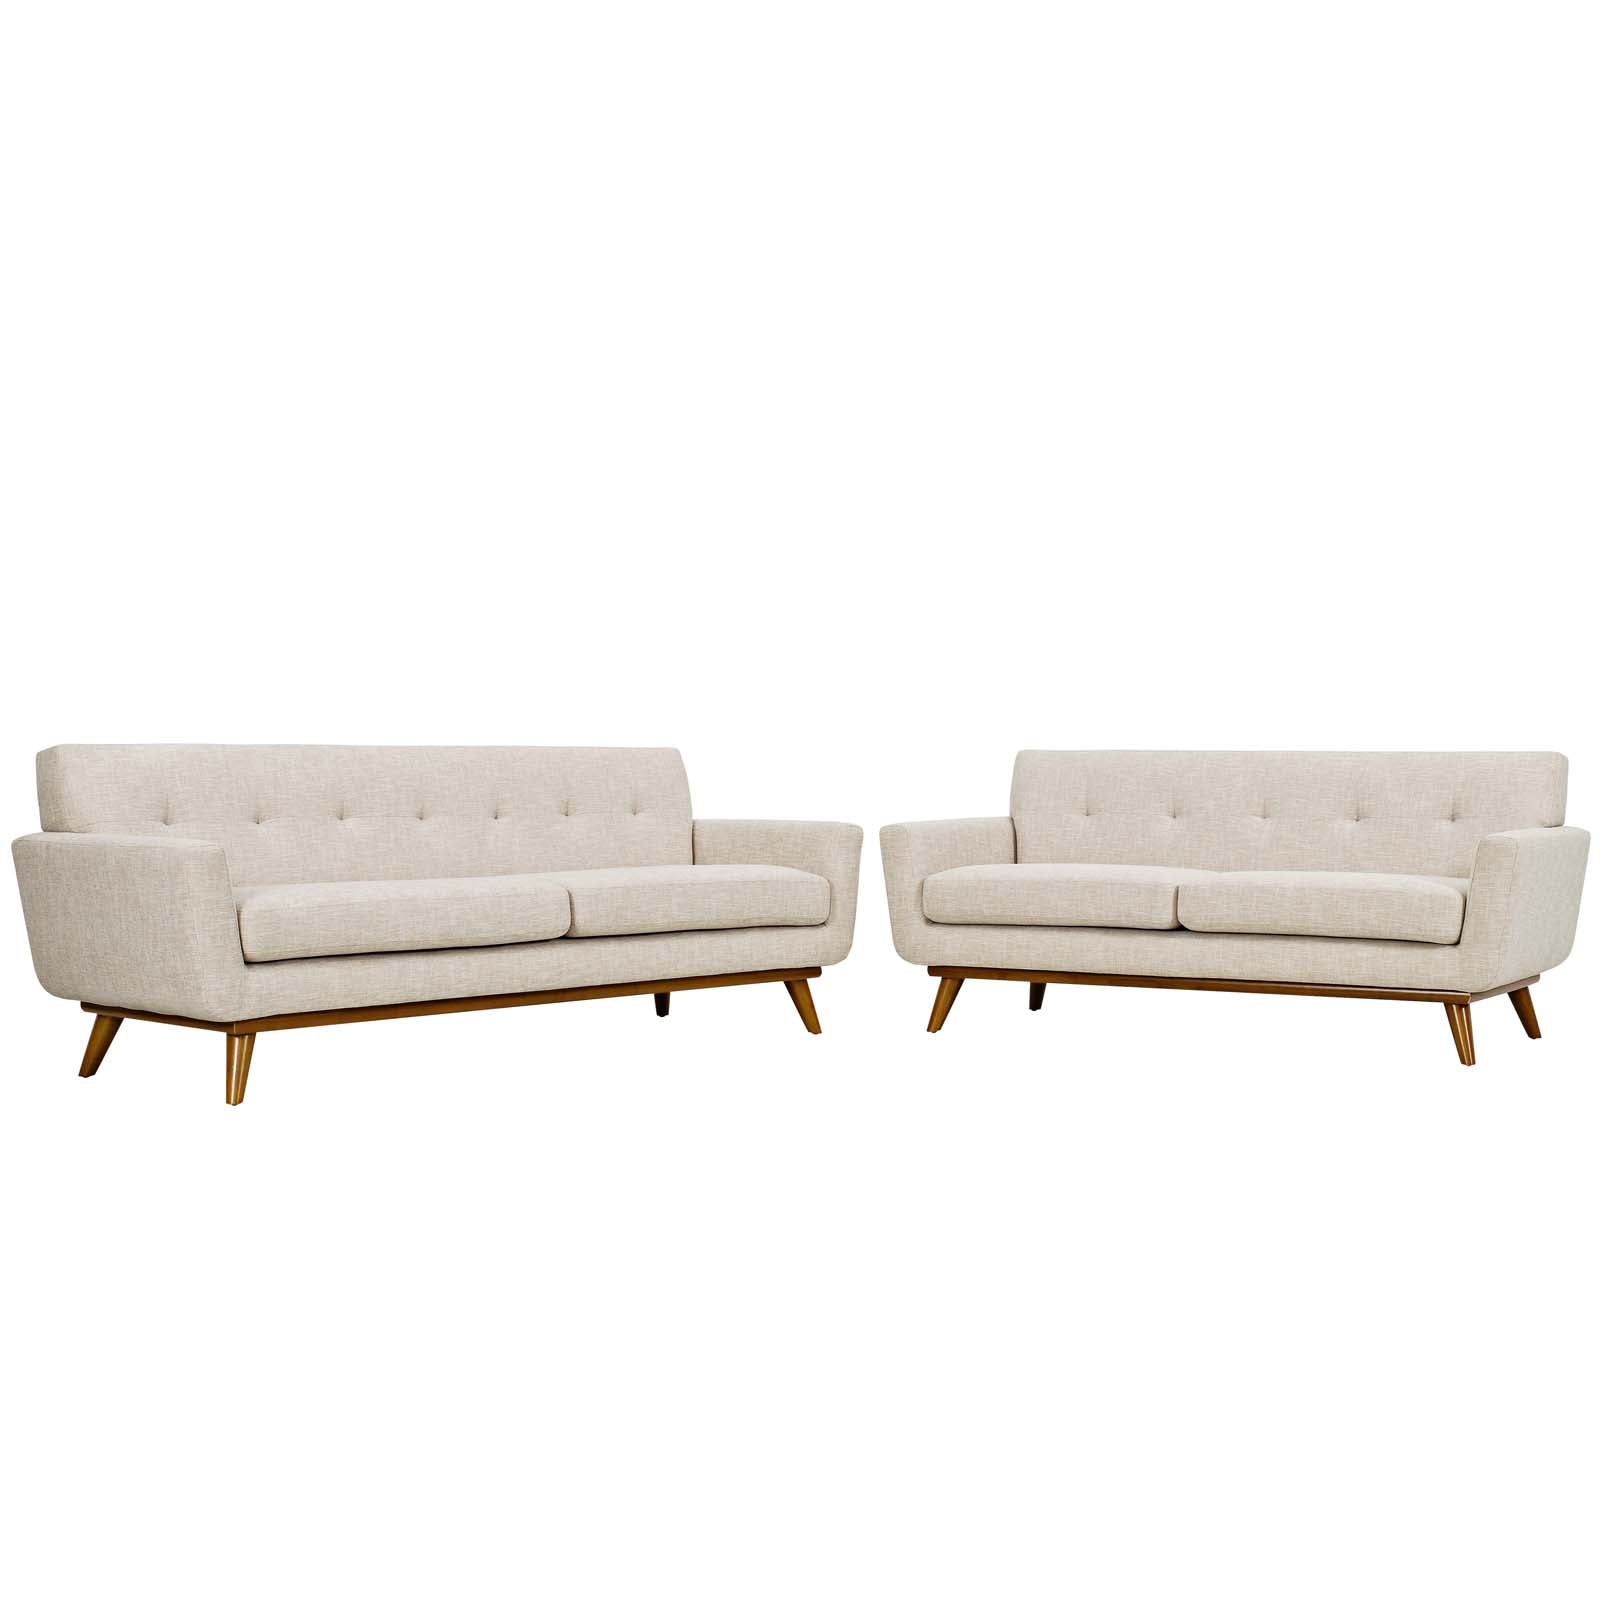 Modway Living Room Sets - Engage Loveseat and Sofa Beige ( Set of 2 )